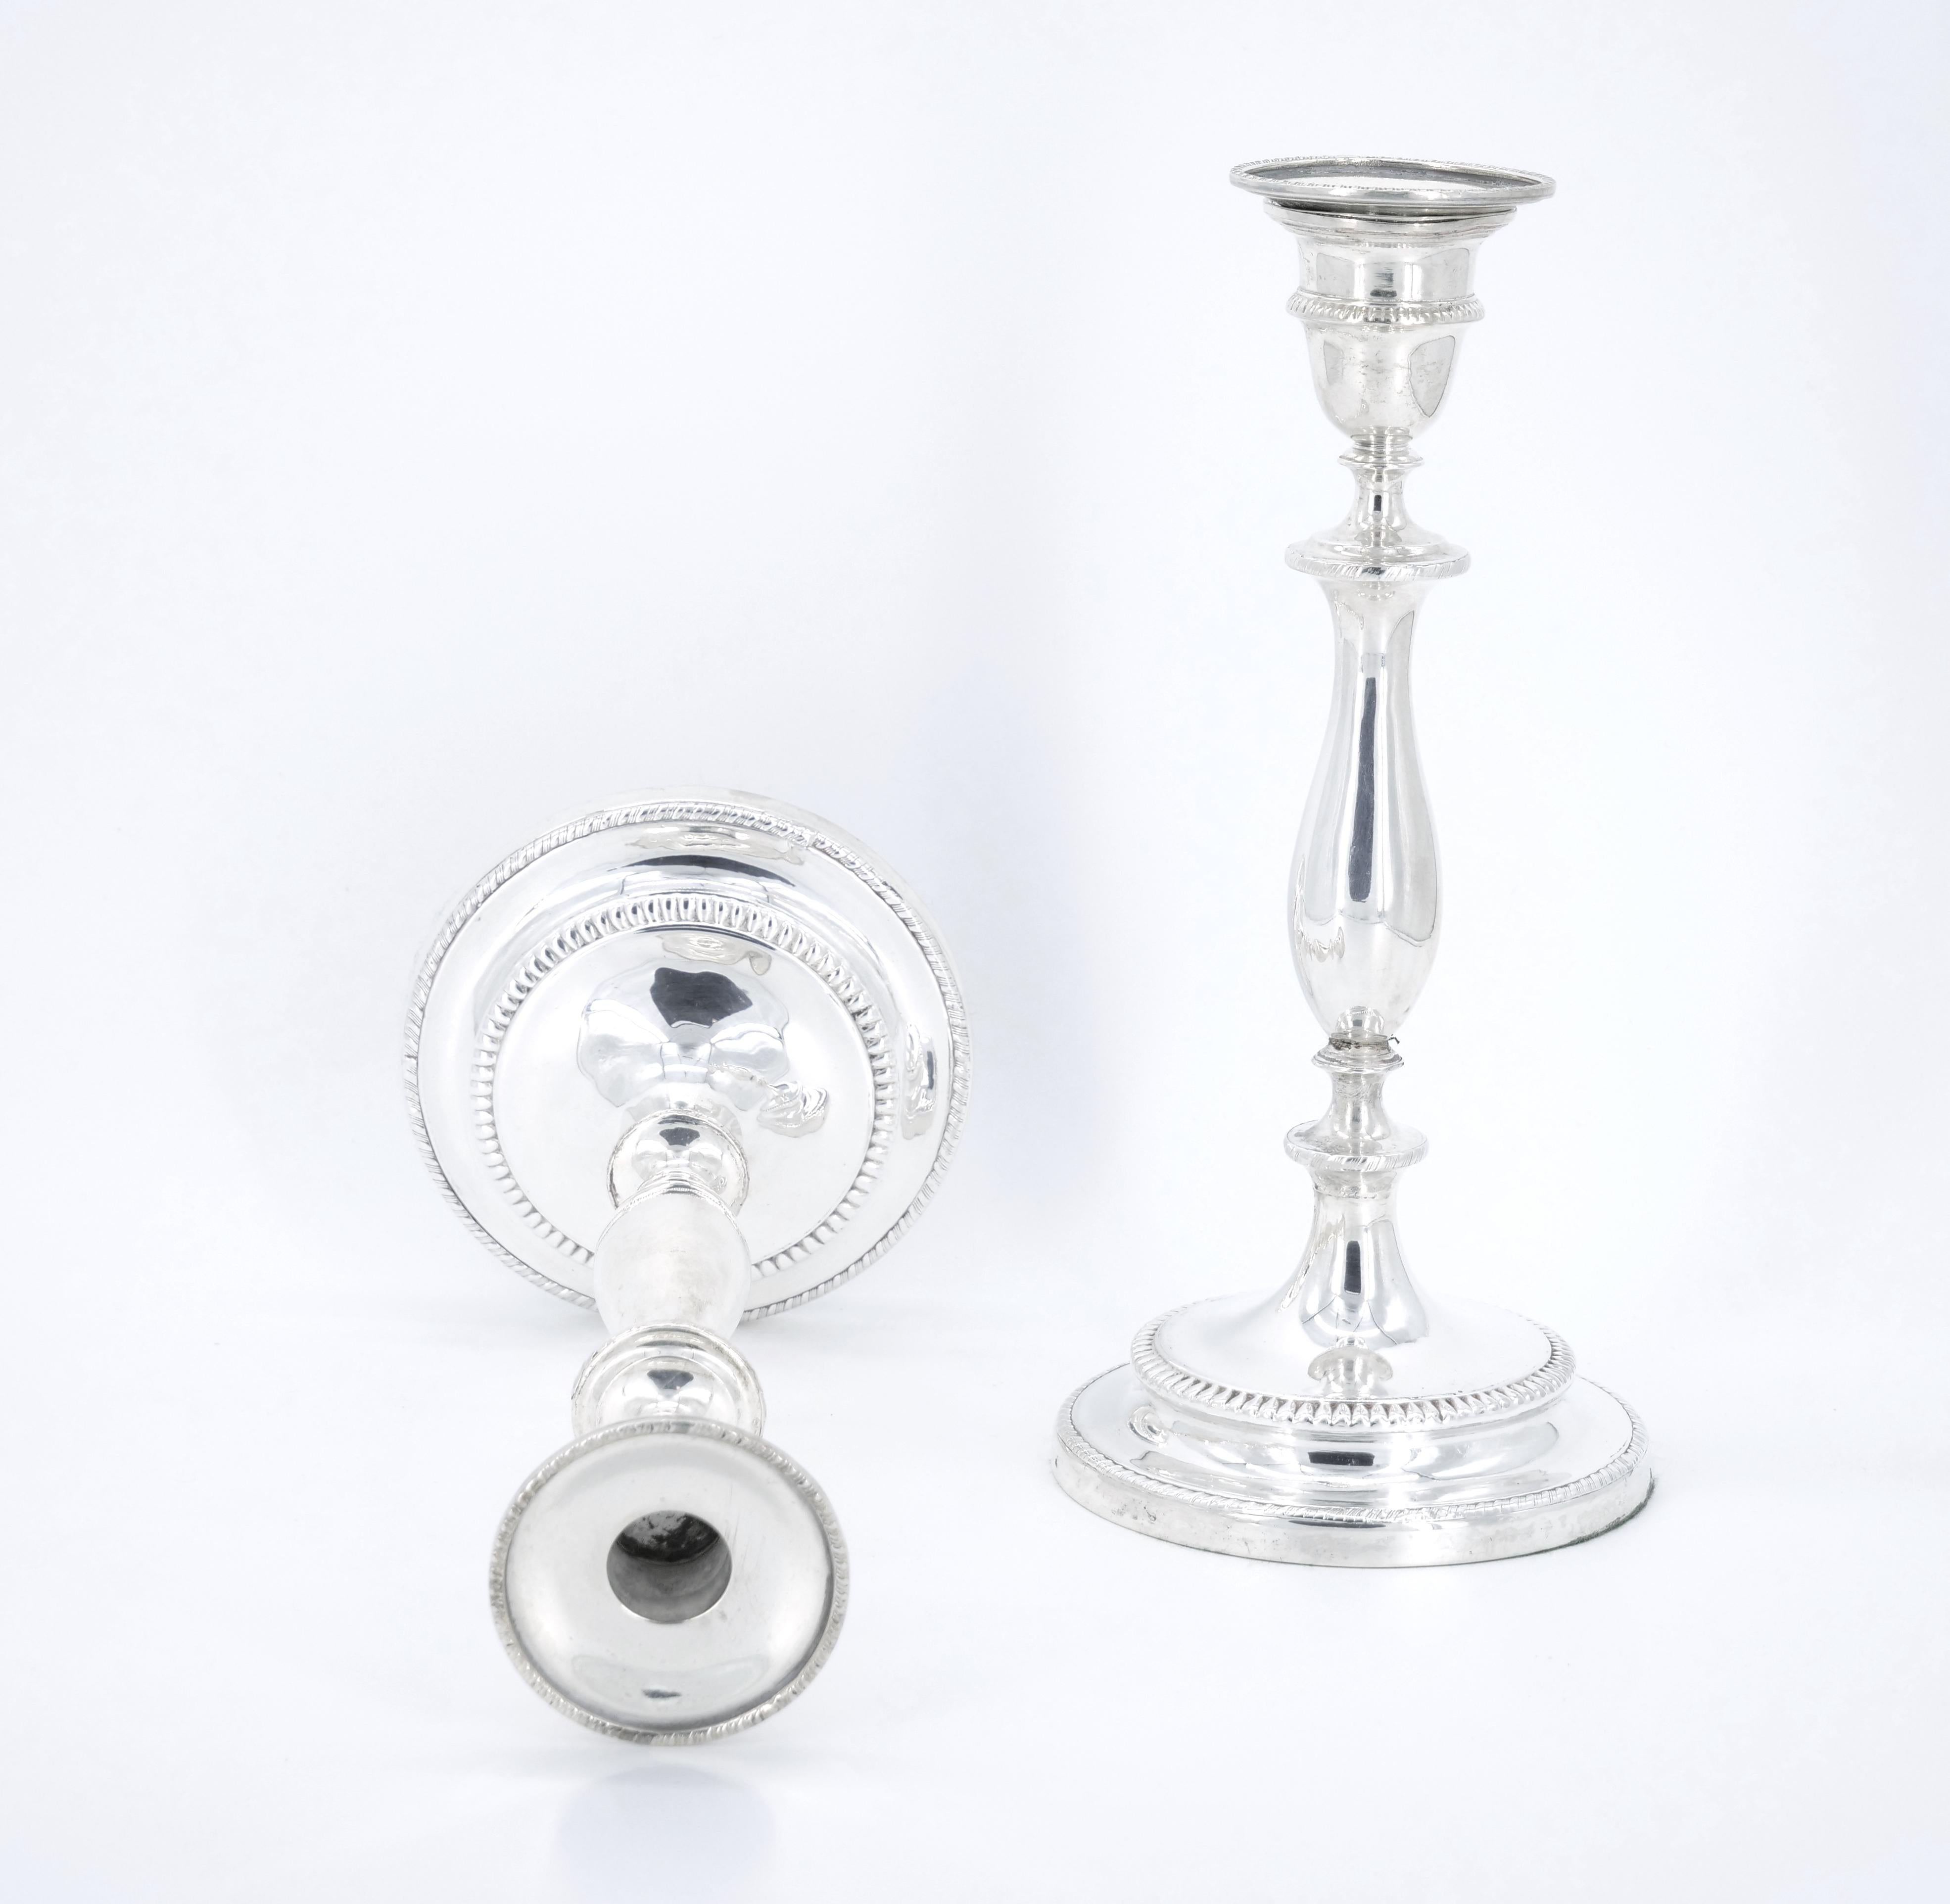 Pair English Regency Period Sheffield Plate Candlesticks circa 1800s For Sale 5